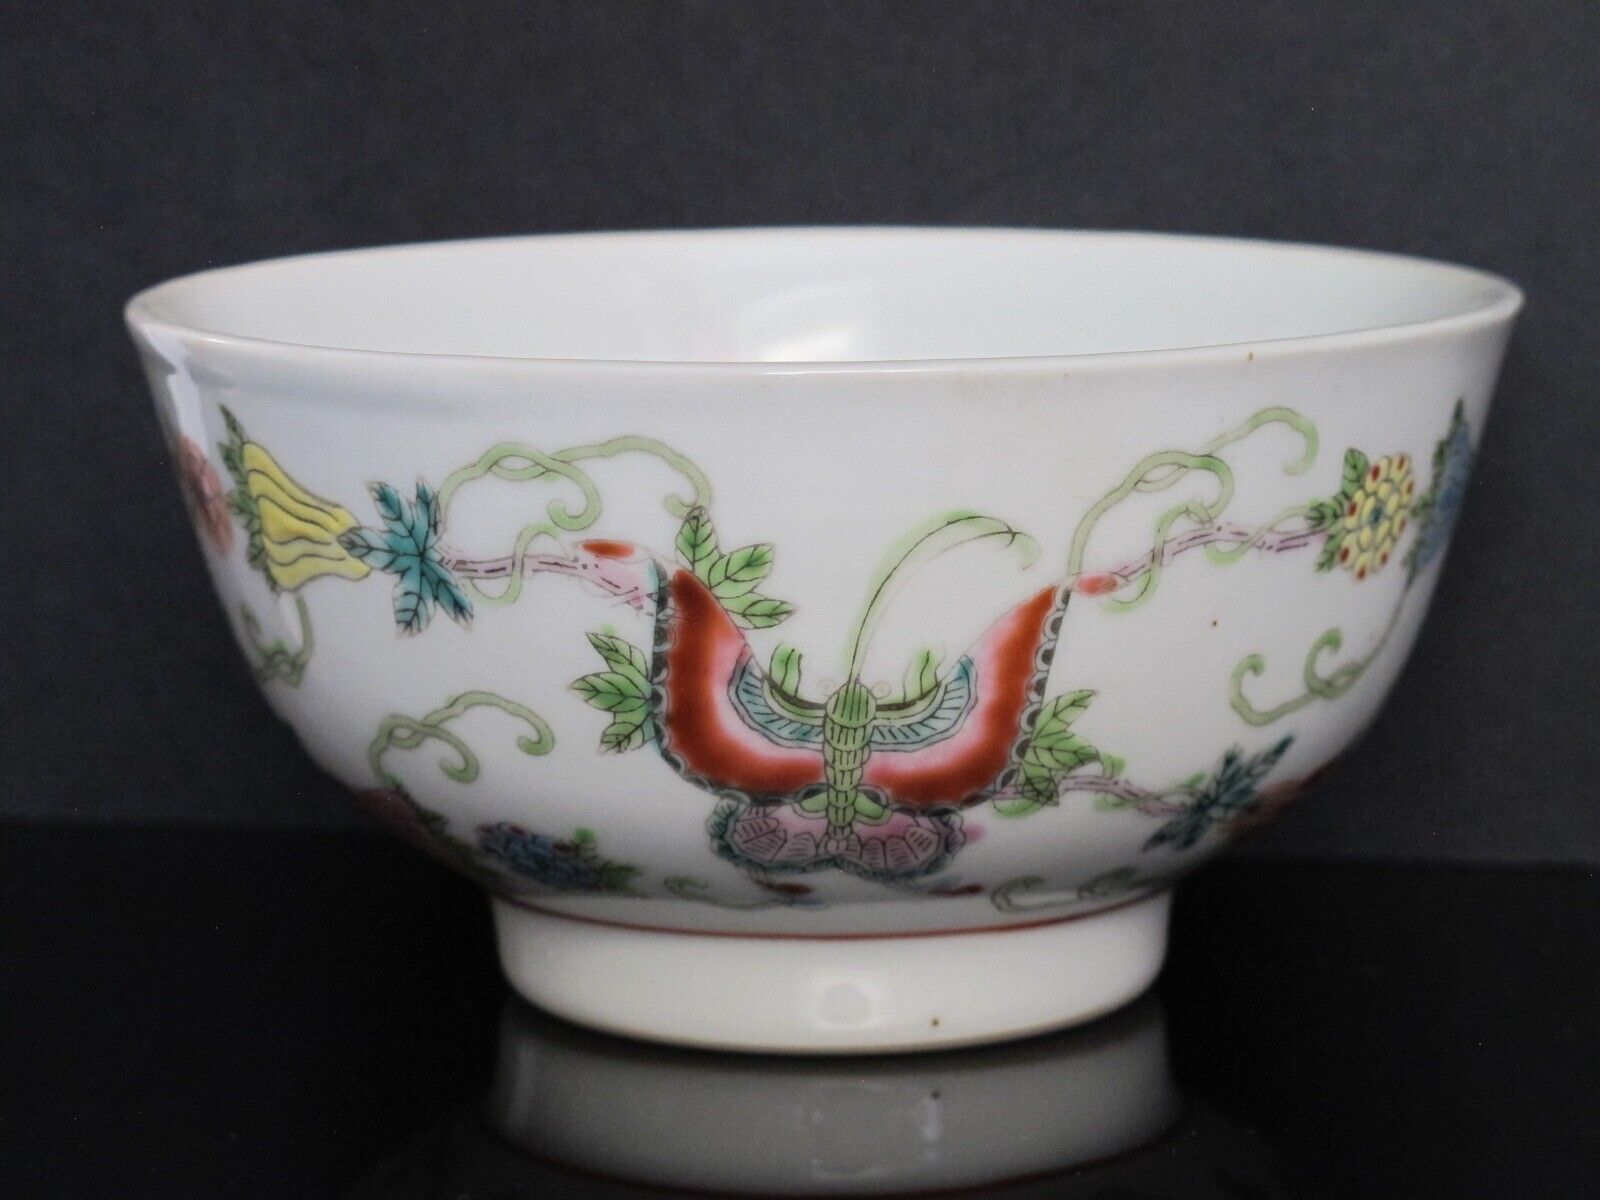 Vintage Chinese Hand-painted Famille Rose Bowl - Excellent Condition, Beauty